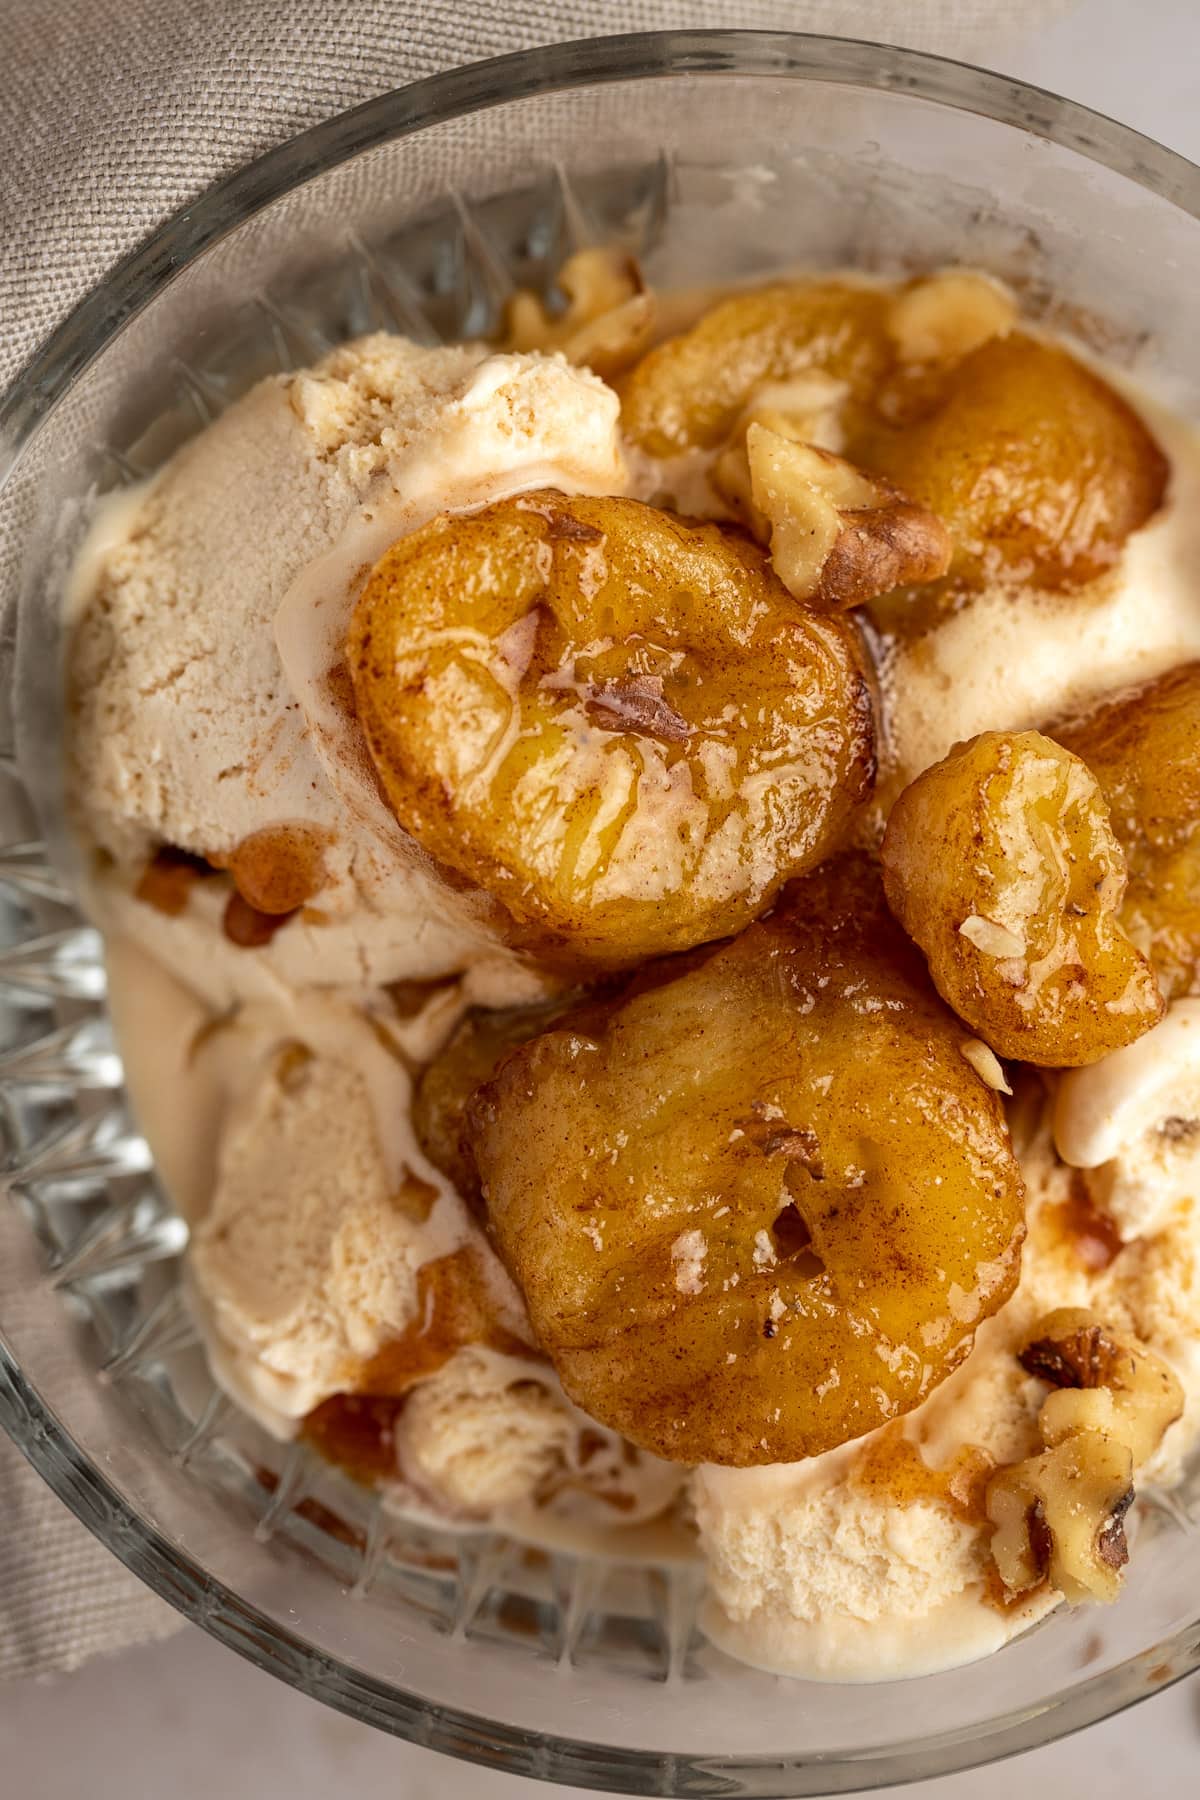 Up close view of caramelized bananas served in a glass bowl with walnut ice cream.